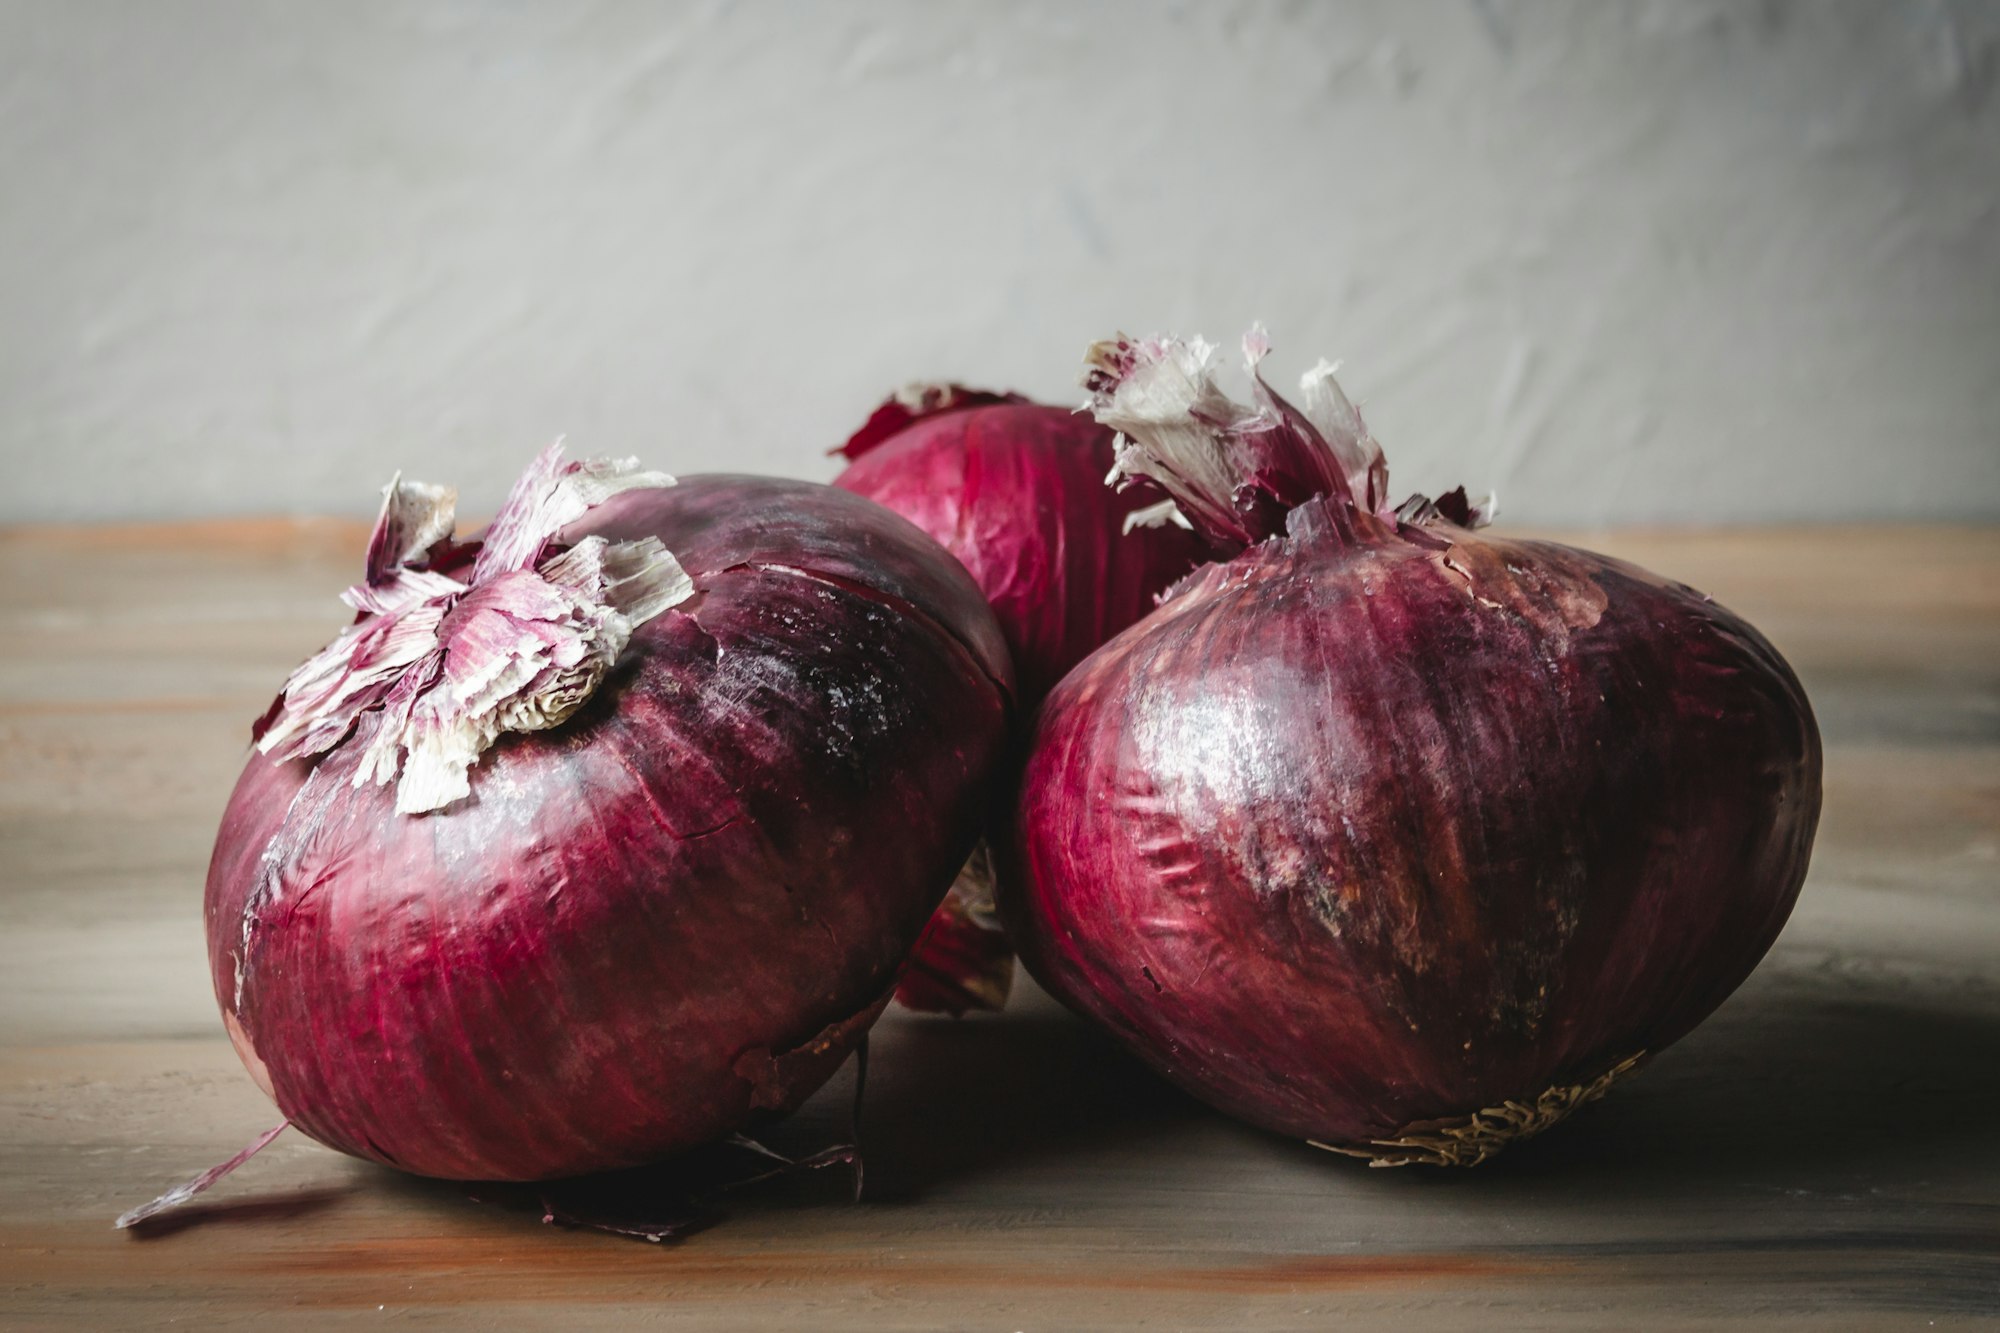 Three red onions on a wood table